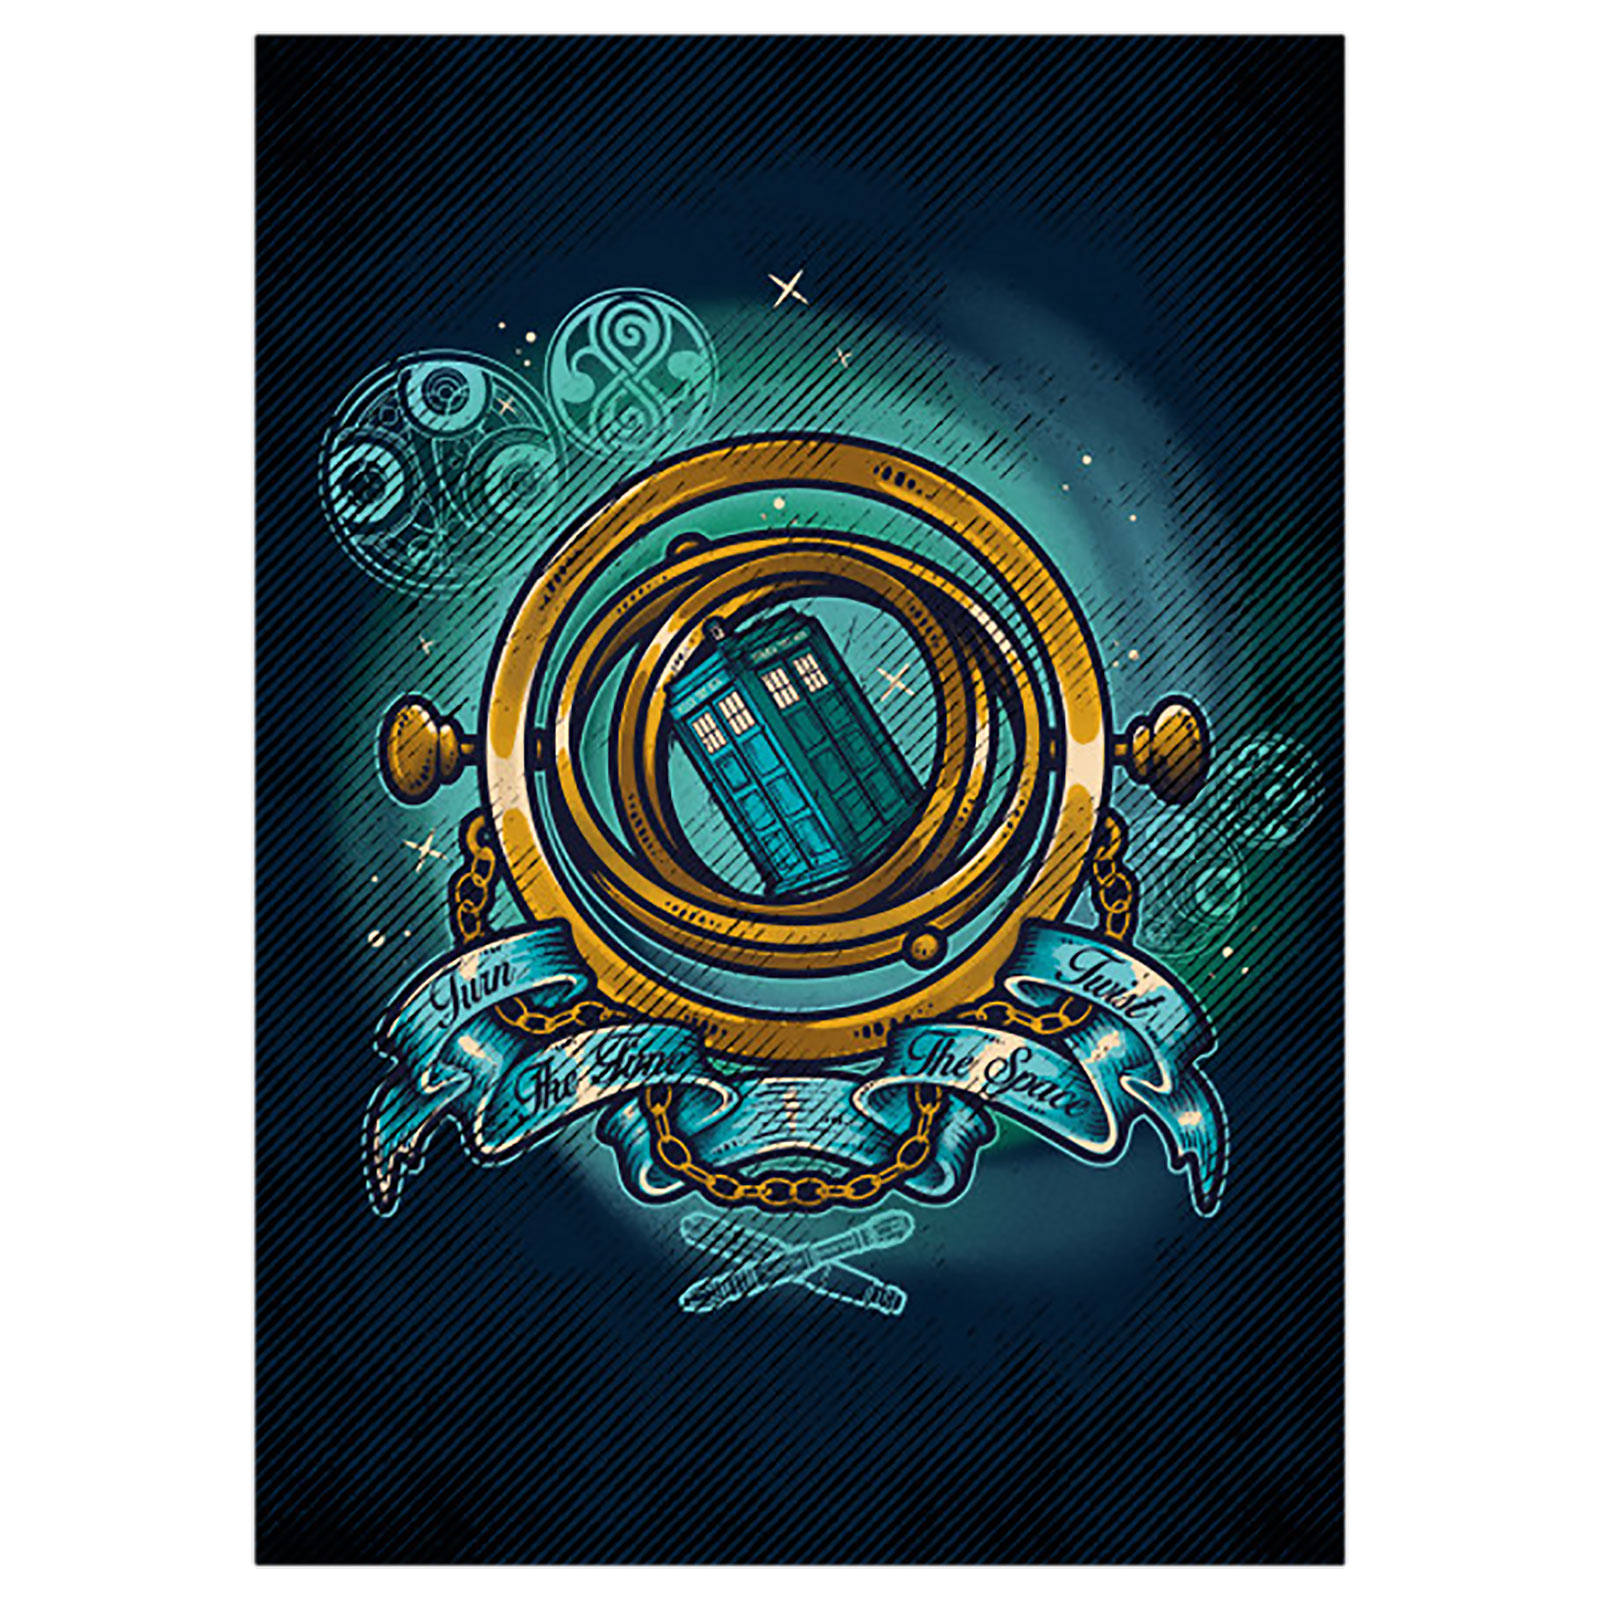 Turn Time Twist Space Metall Poster für Doctor Who Fans